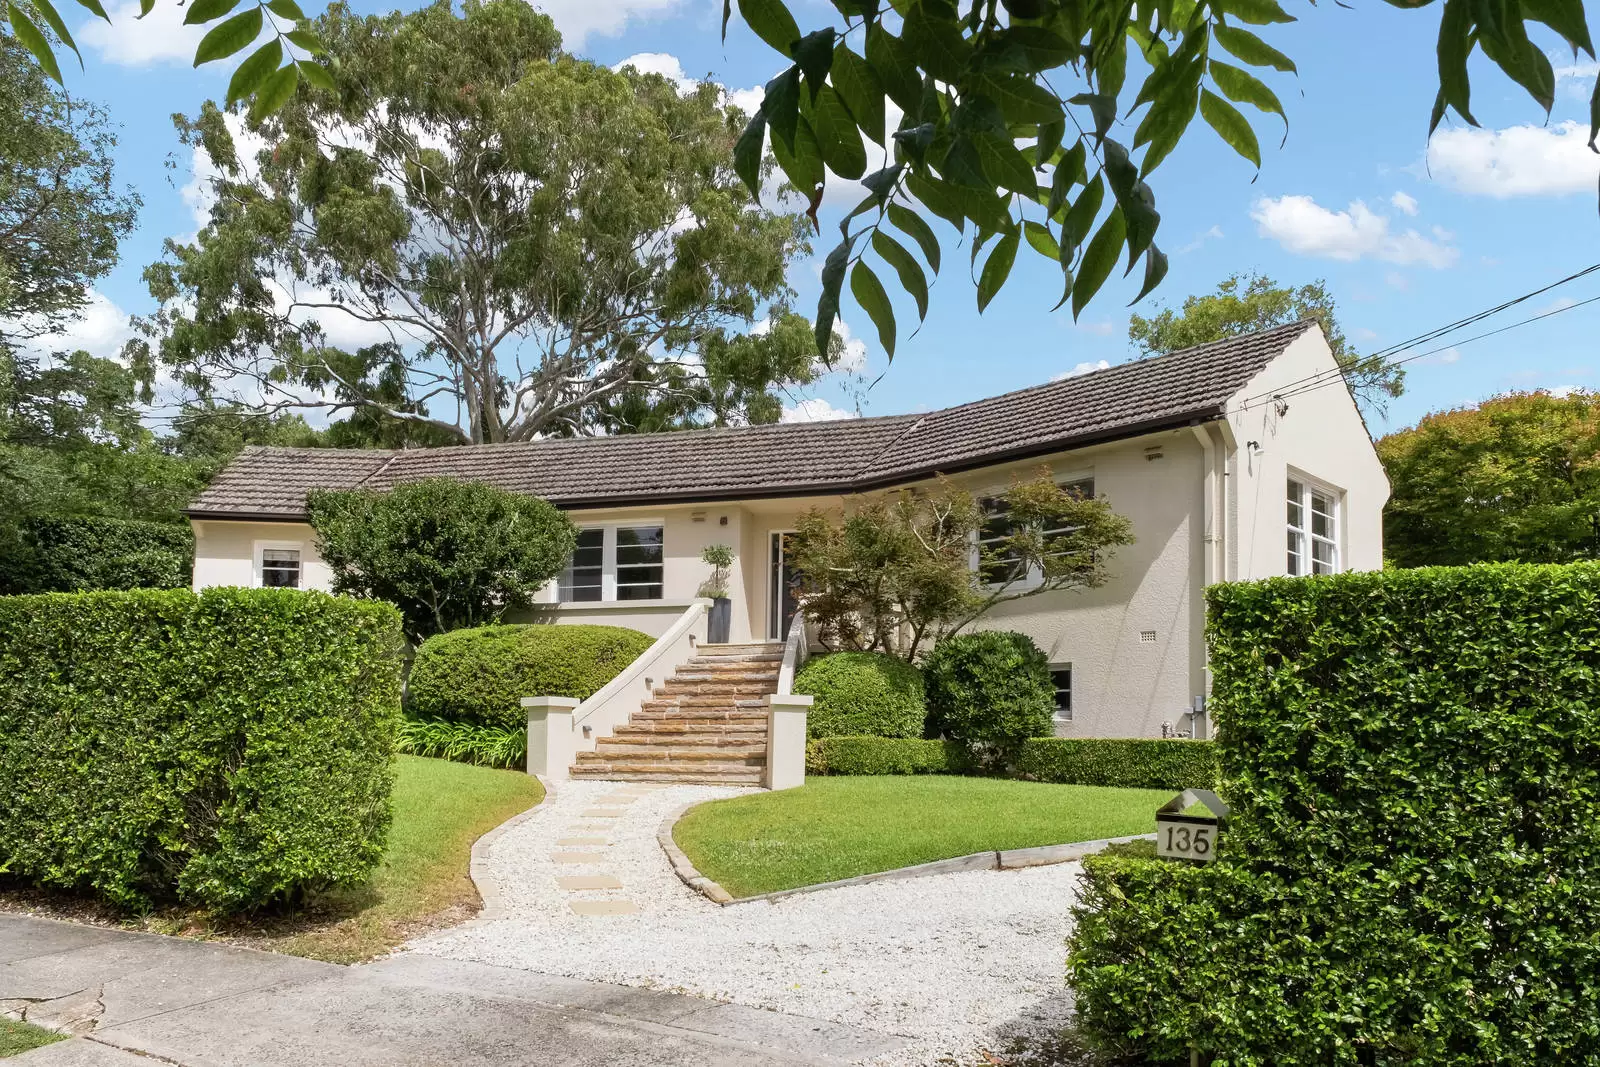 Photo #1: 135 Highfield Road, Lindfield - Sold by Sydney Sotheby's International Realty